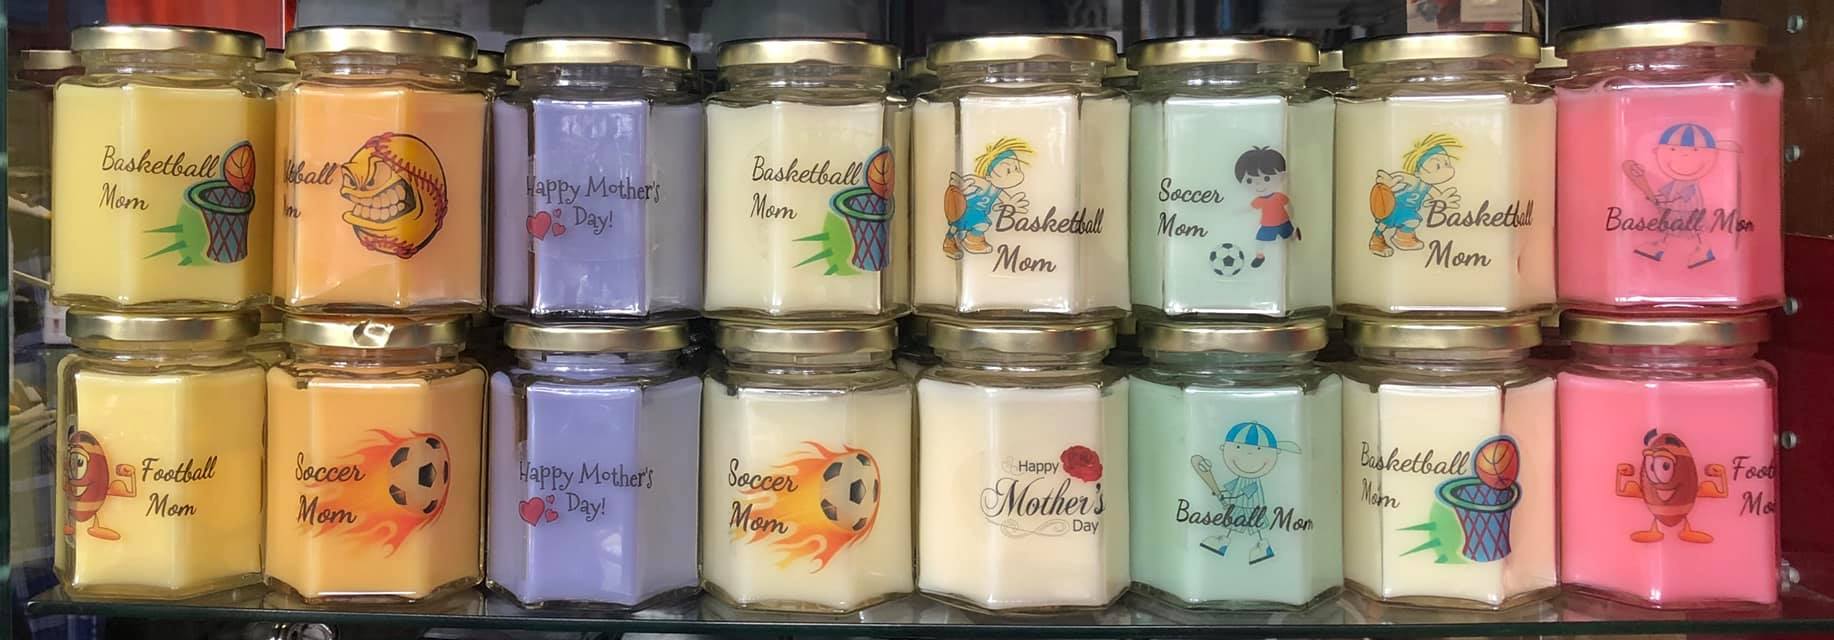 8oz Candels that say "Thank You Mom" by justmakescense - AtlanticCoastSports